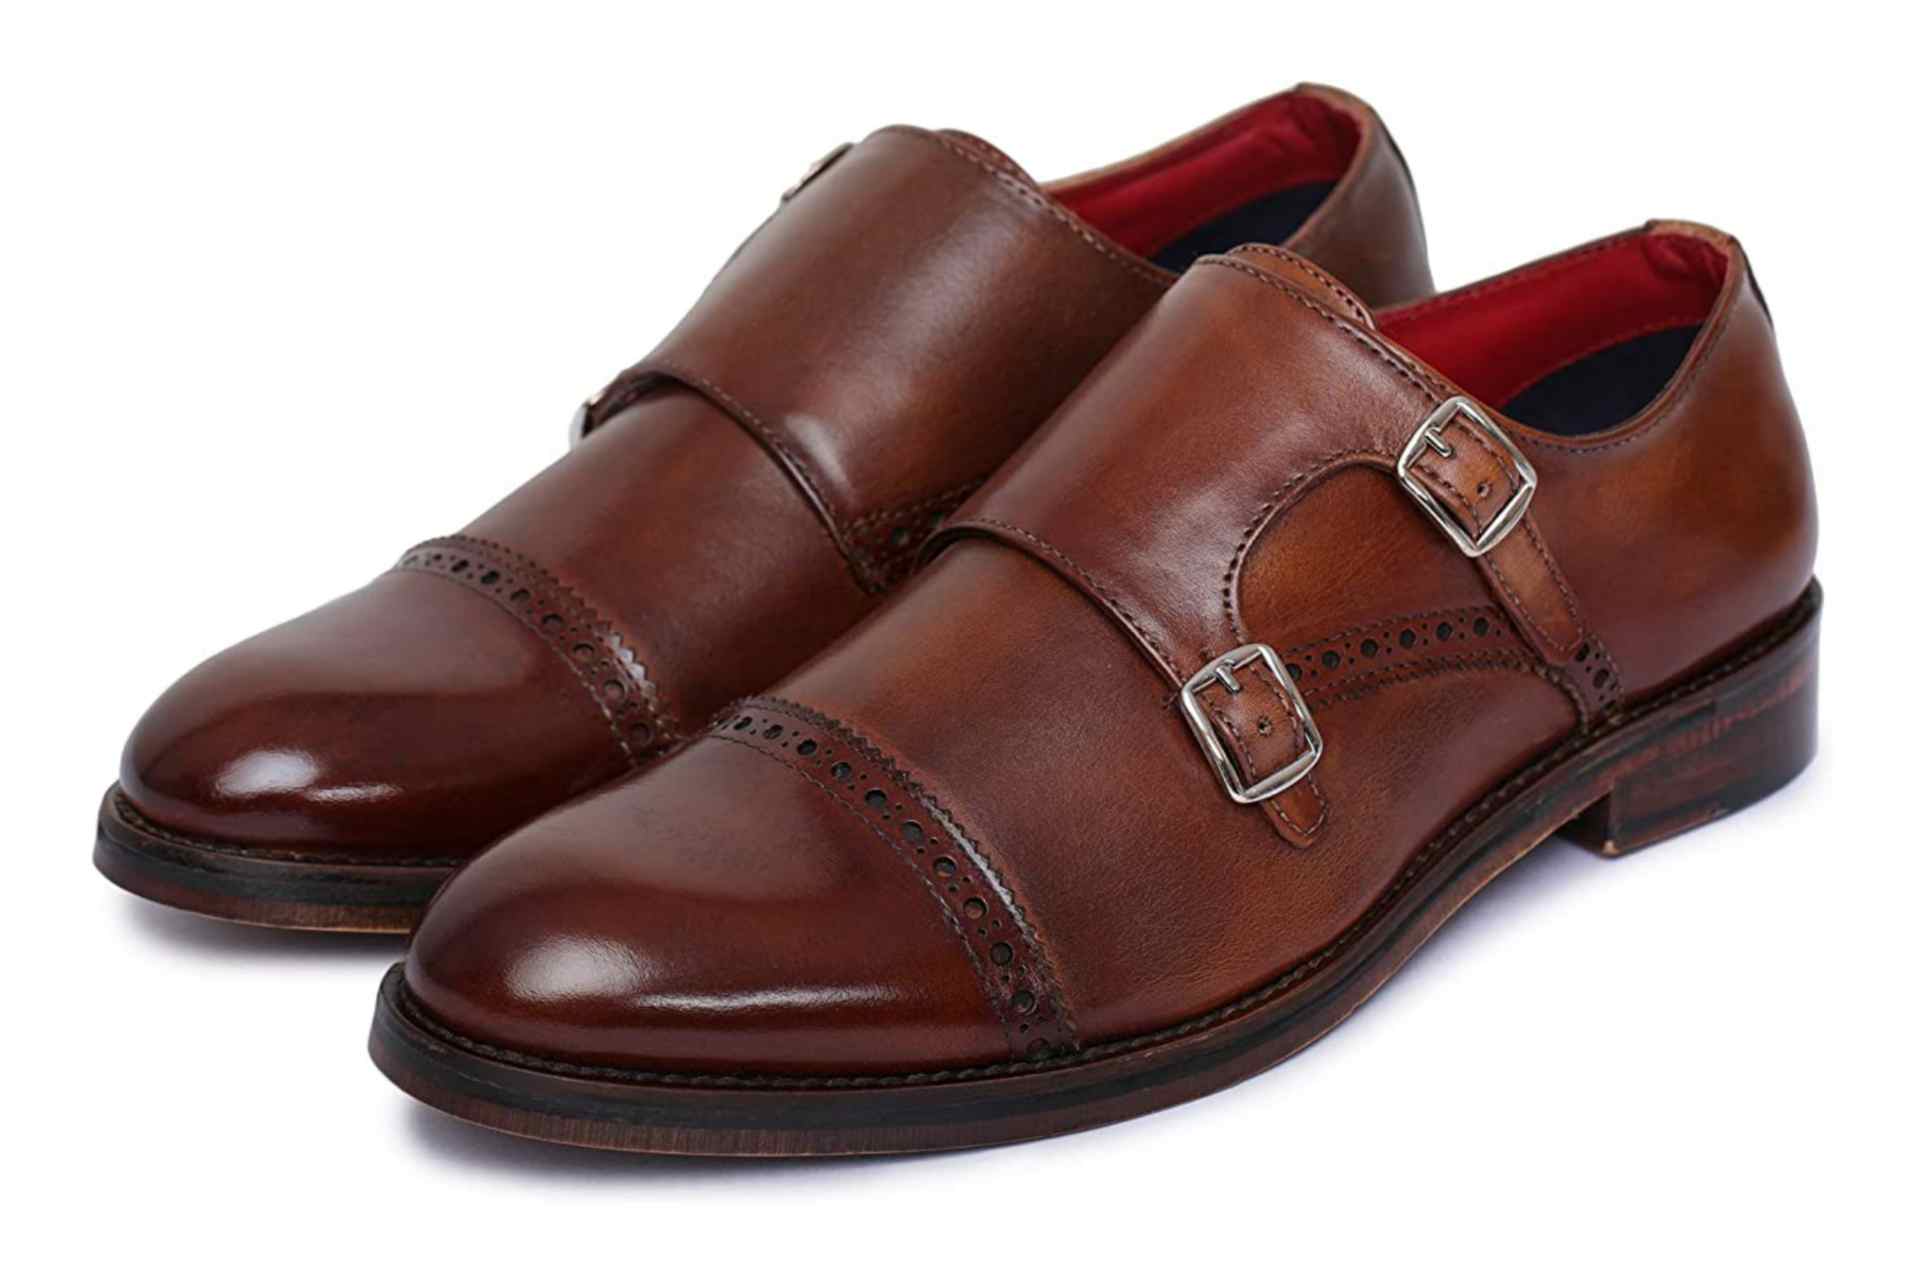 Quality brown Monk Strap shoes for men